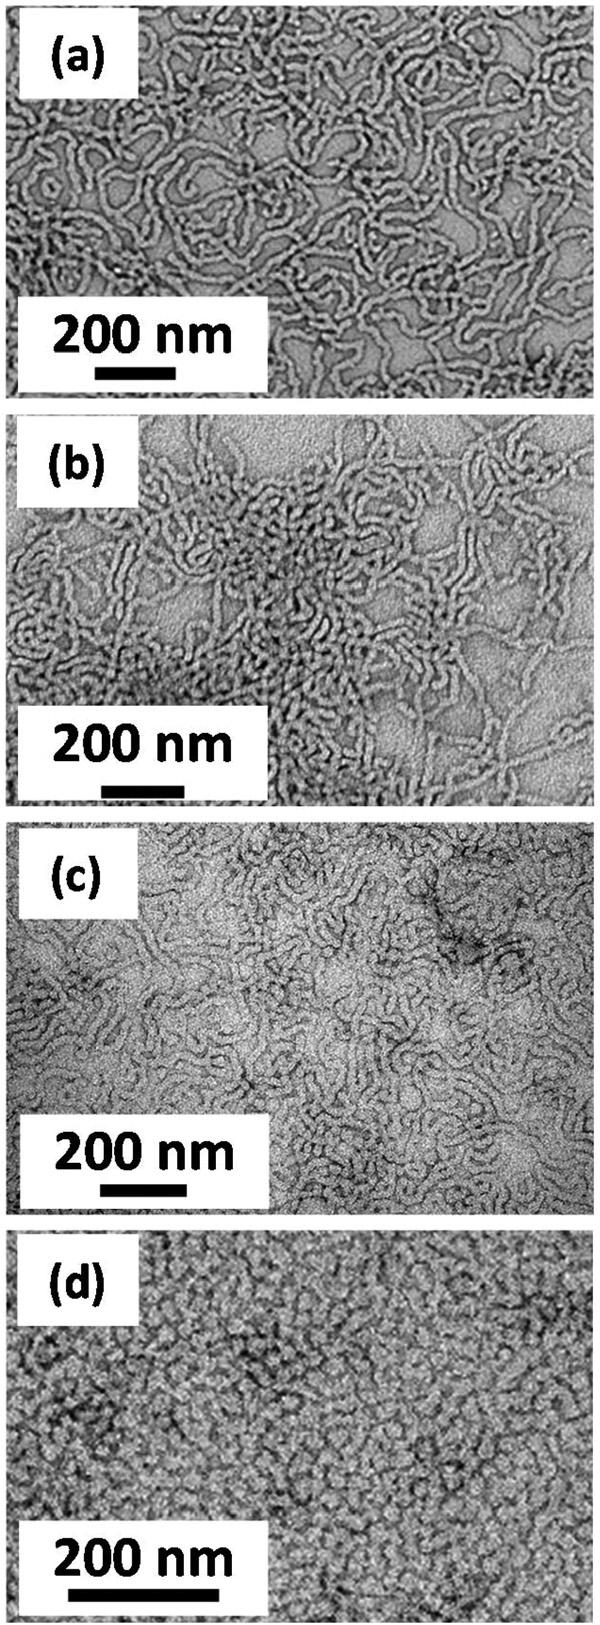 Fig. 7 Representative TEM images recorded for: (a) PGMA 62 -PHPMA 140 worms (control); (b) P(GMA 65 -stat-glyma 1.7 )-PHPMA 140 worms prior to cystamine derivatization; (c) P(GMA 65 -GlyMA 1.